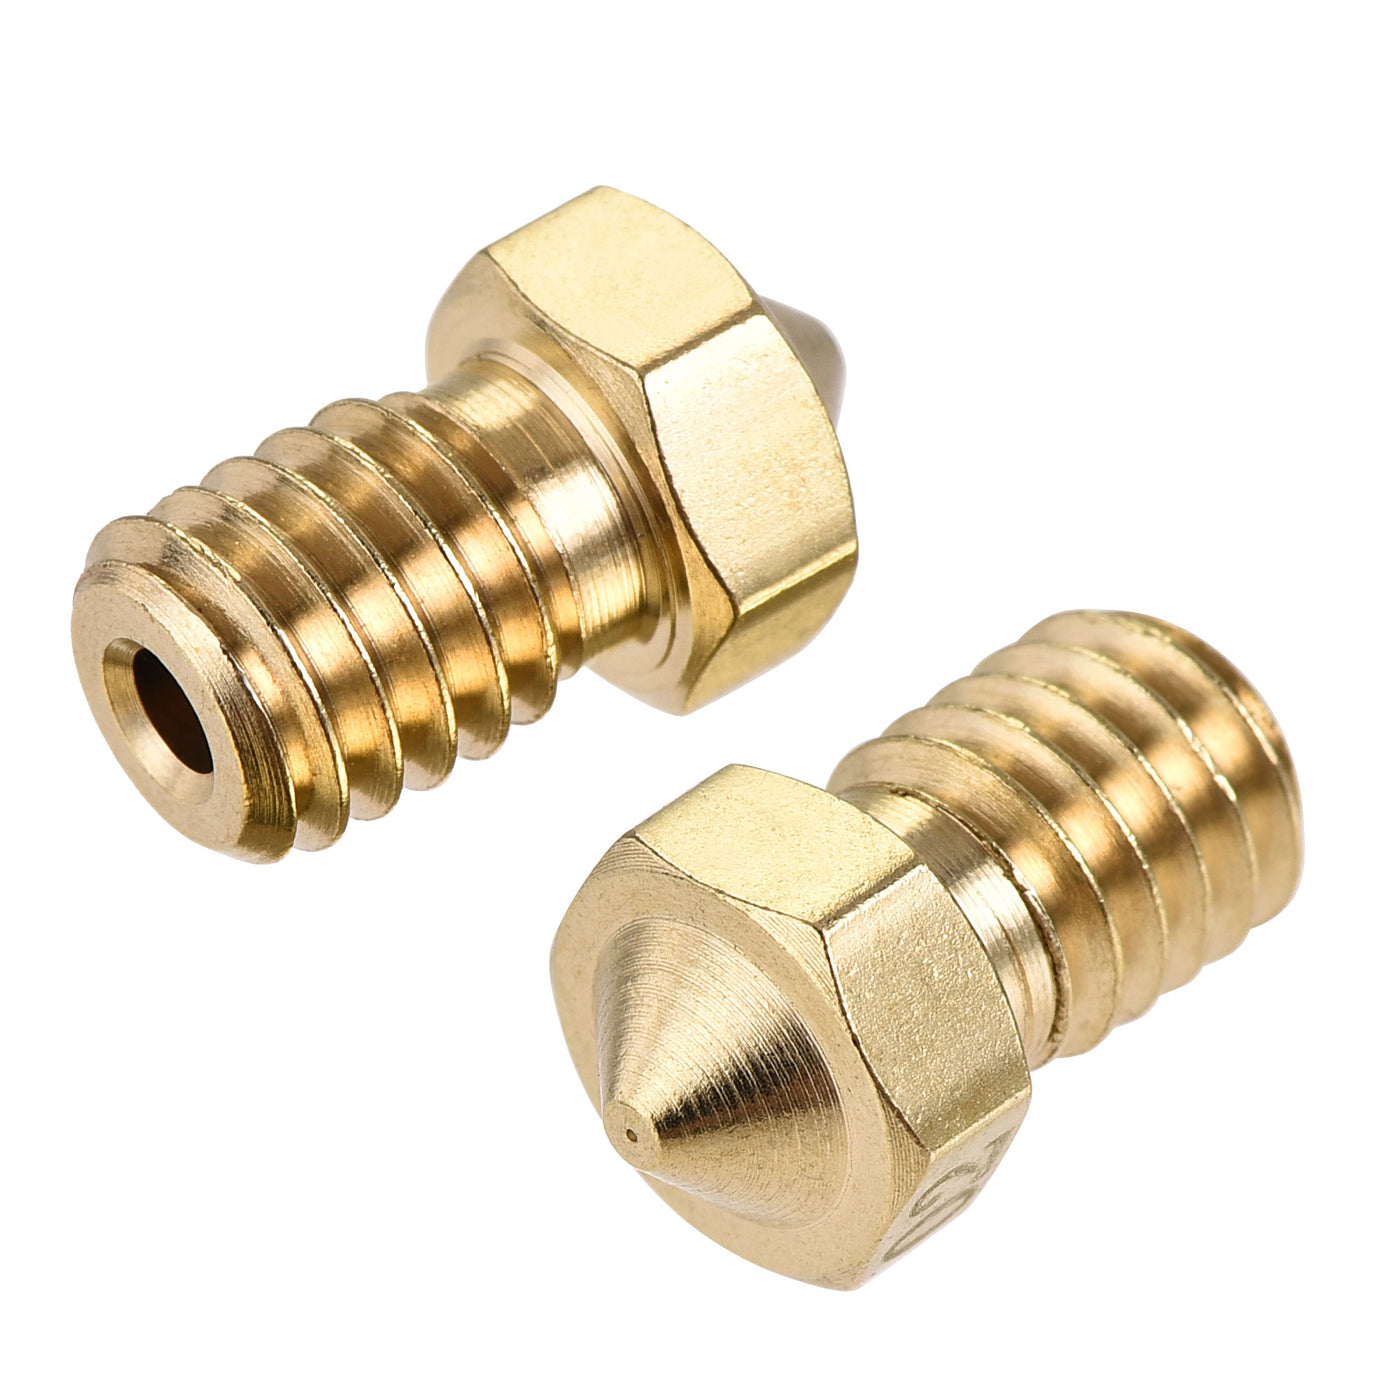 uxcell Uxcell 0.2mm 3D Printer Nozzle, 14pcs M6 Thread for V5 V6 1.75mm Extruder Print, Brass